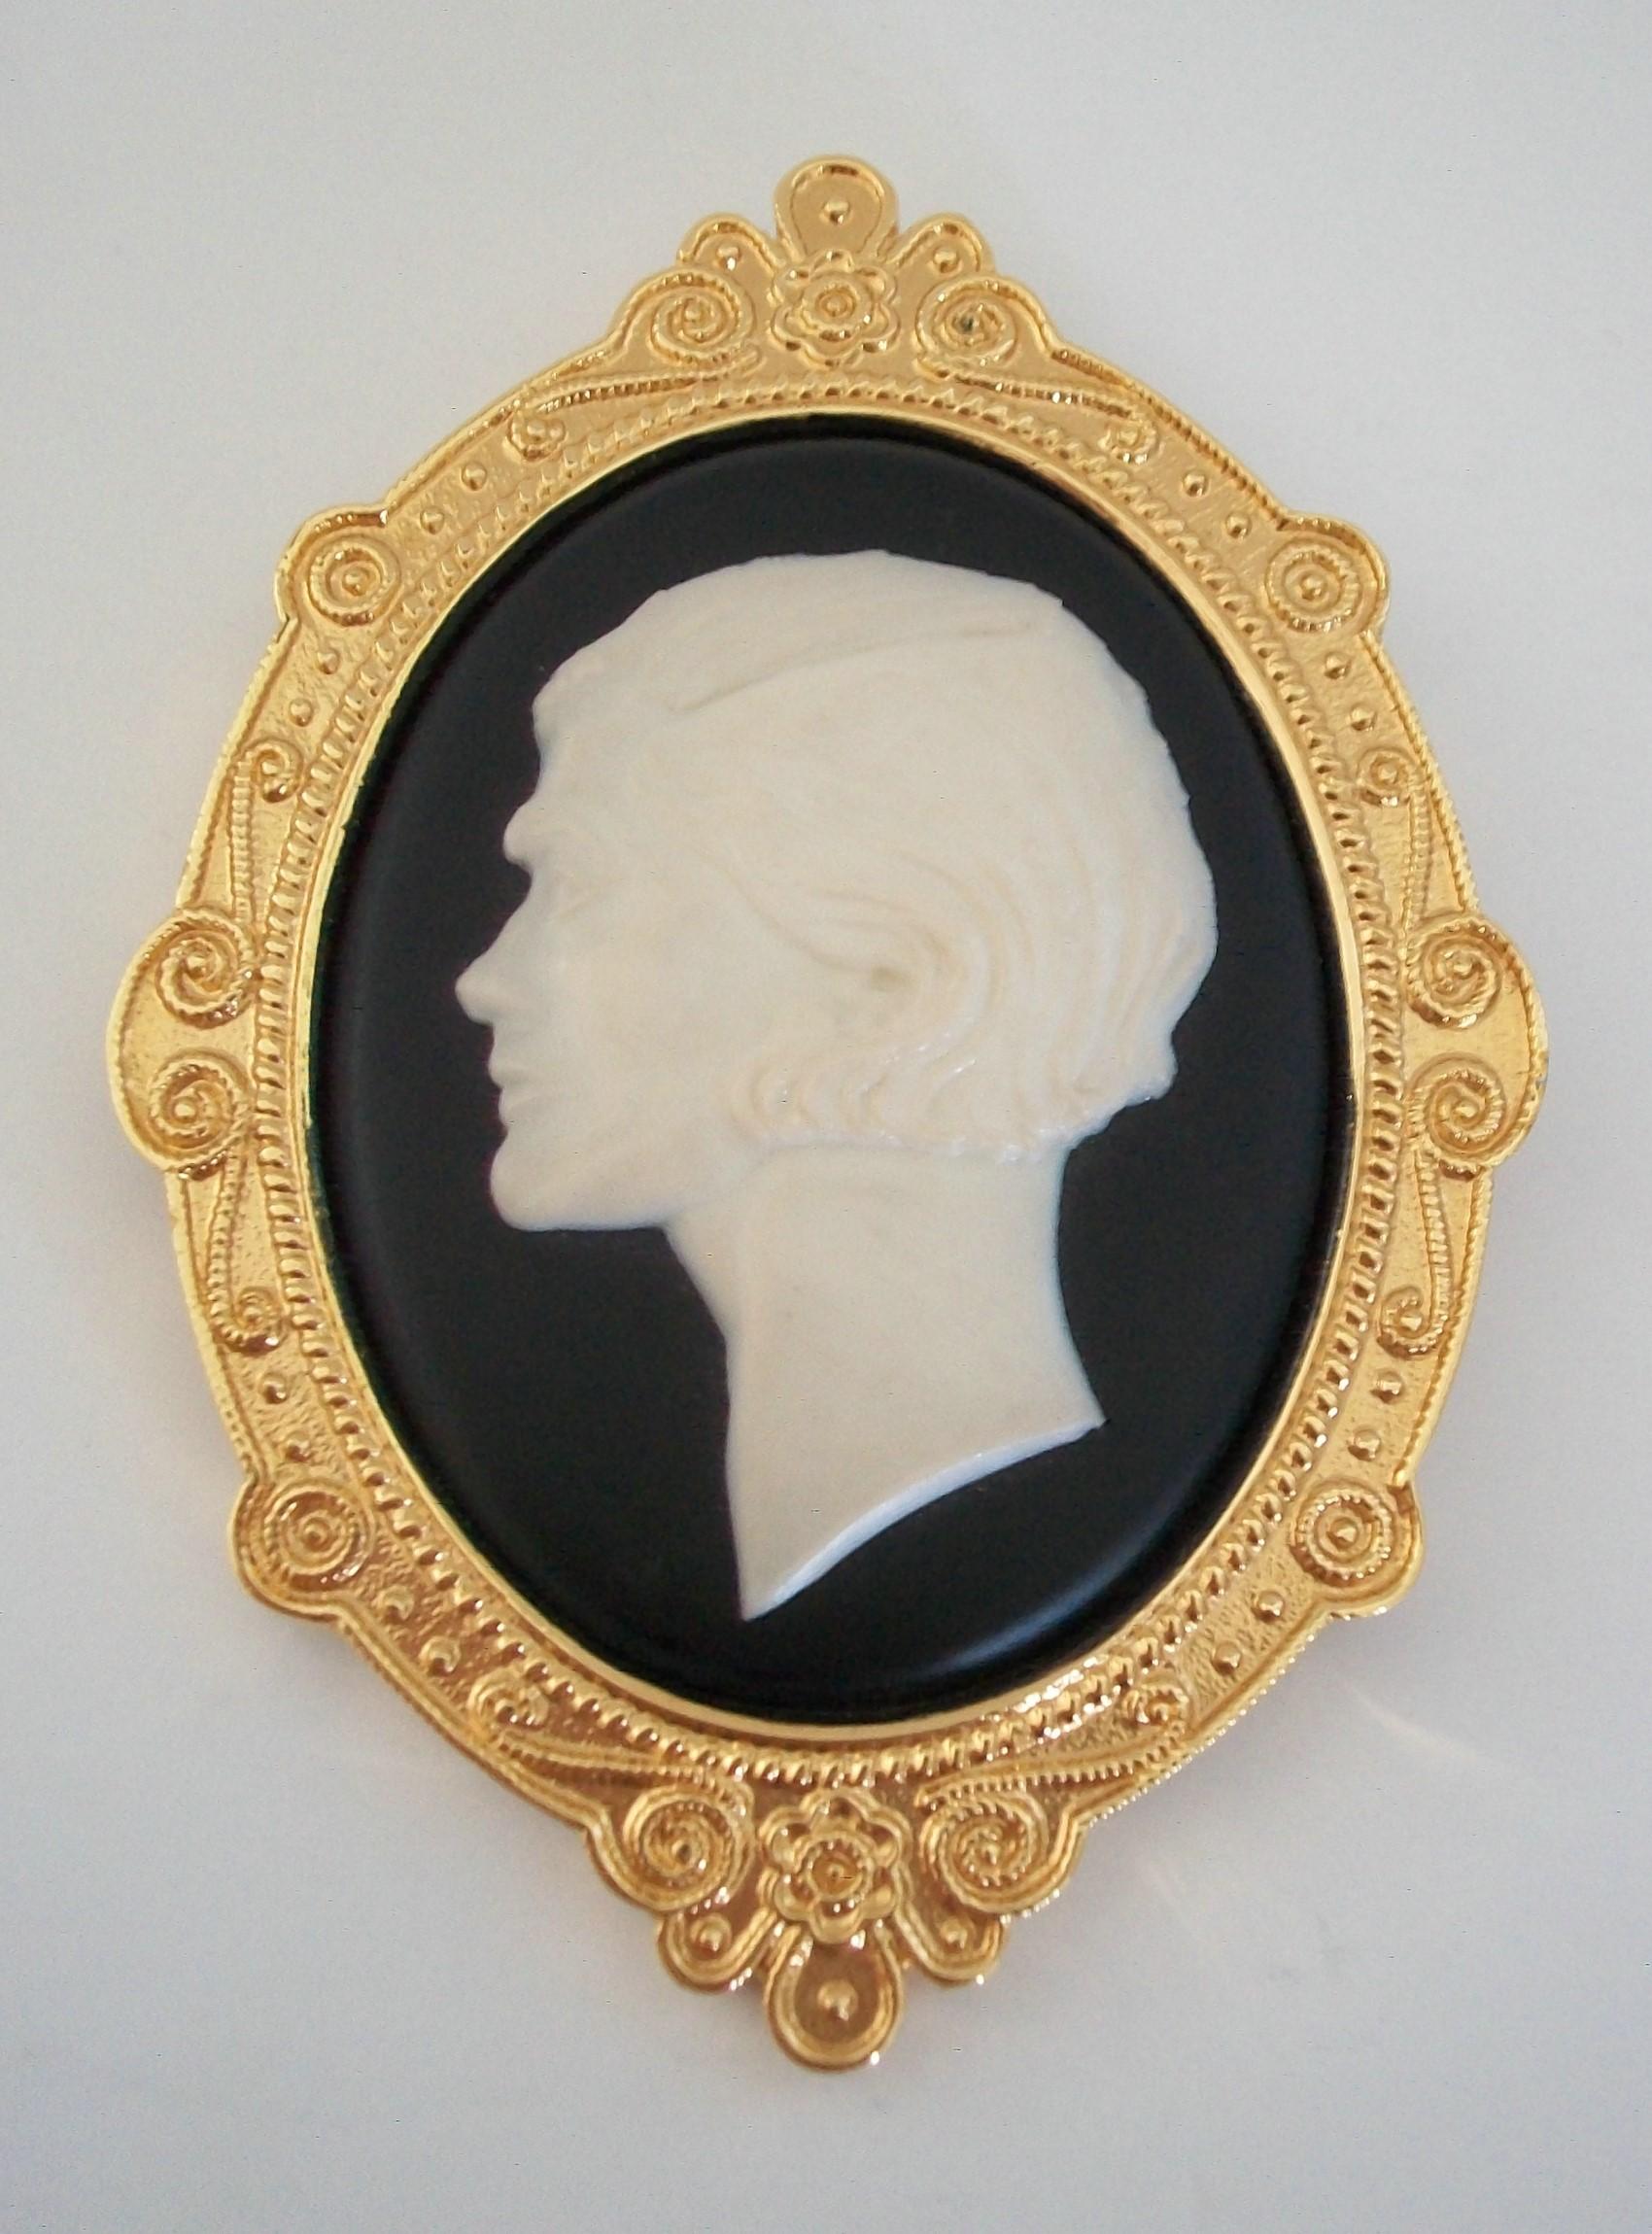 CHANEL - Vintage Over-sized 'Coco' Cameo Brooch - France - Circa 1980's For Sale 4